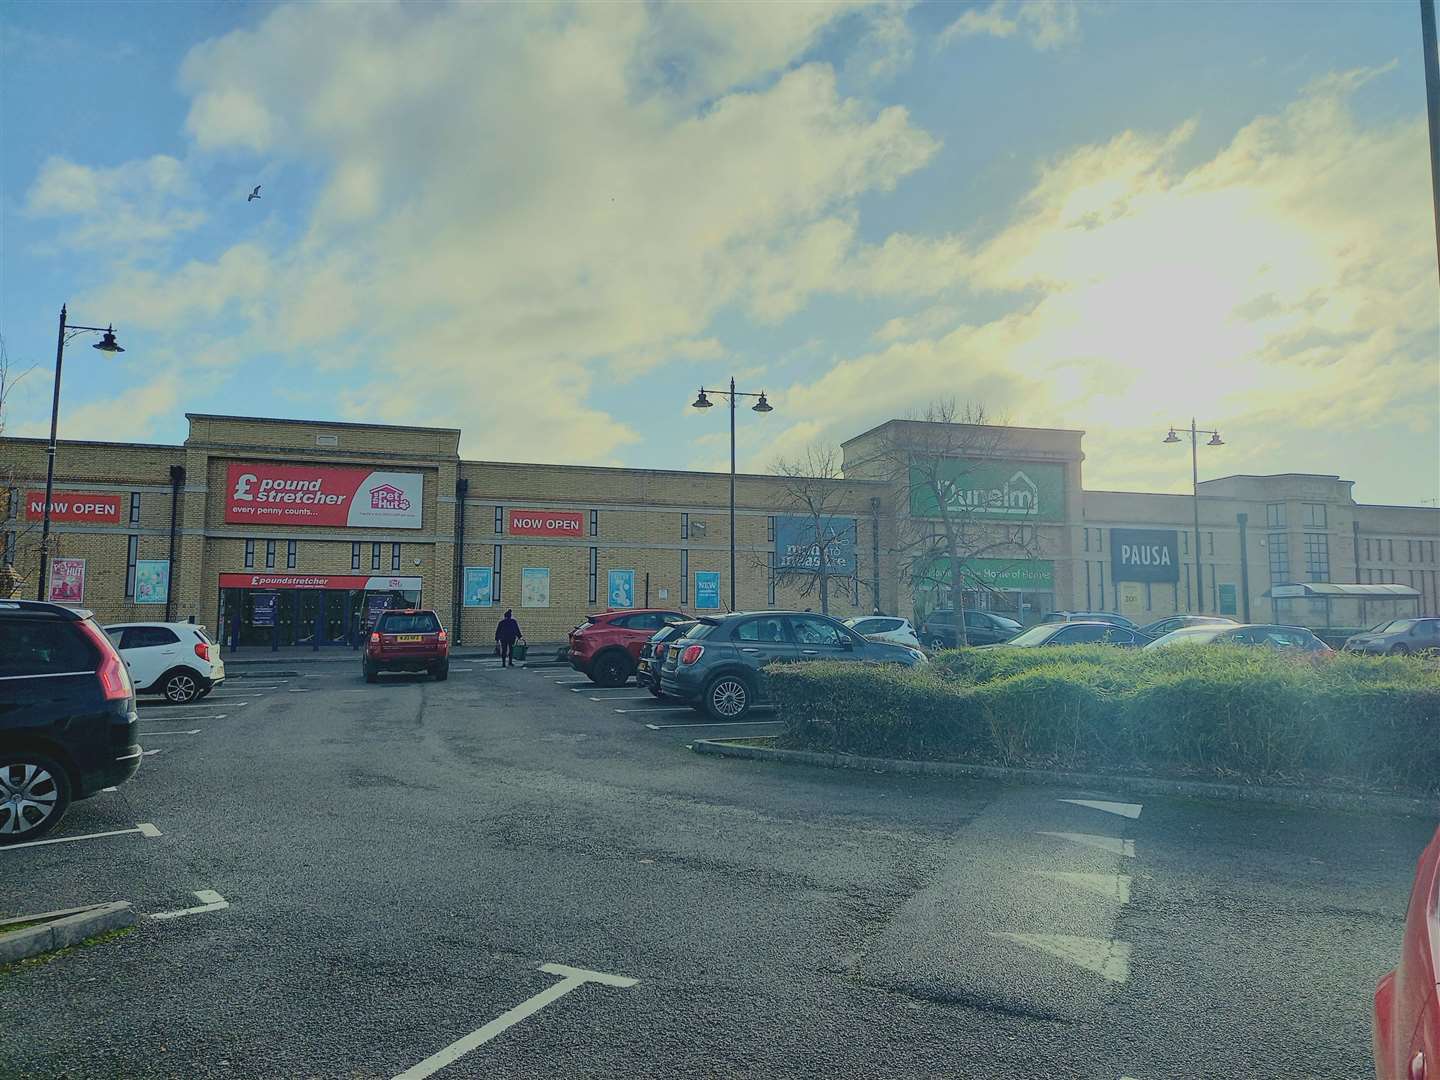 A new tenant will be opening next to Dunelm